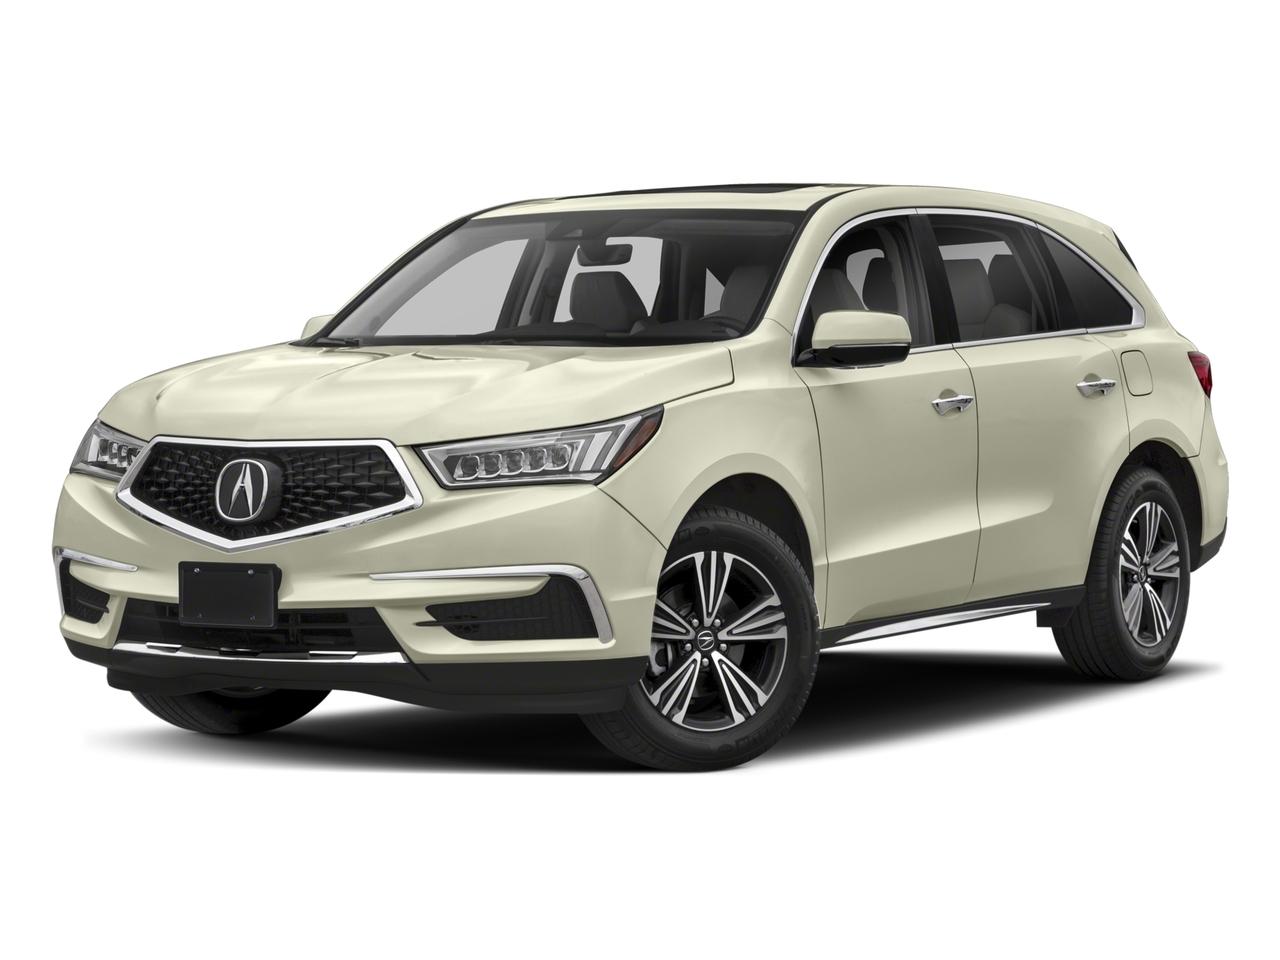 2018 Acura MDX Vehicle Photo in Grapevine, TX 76051